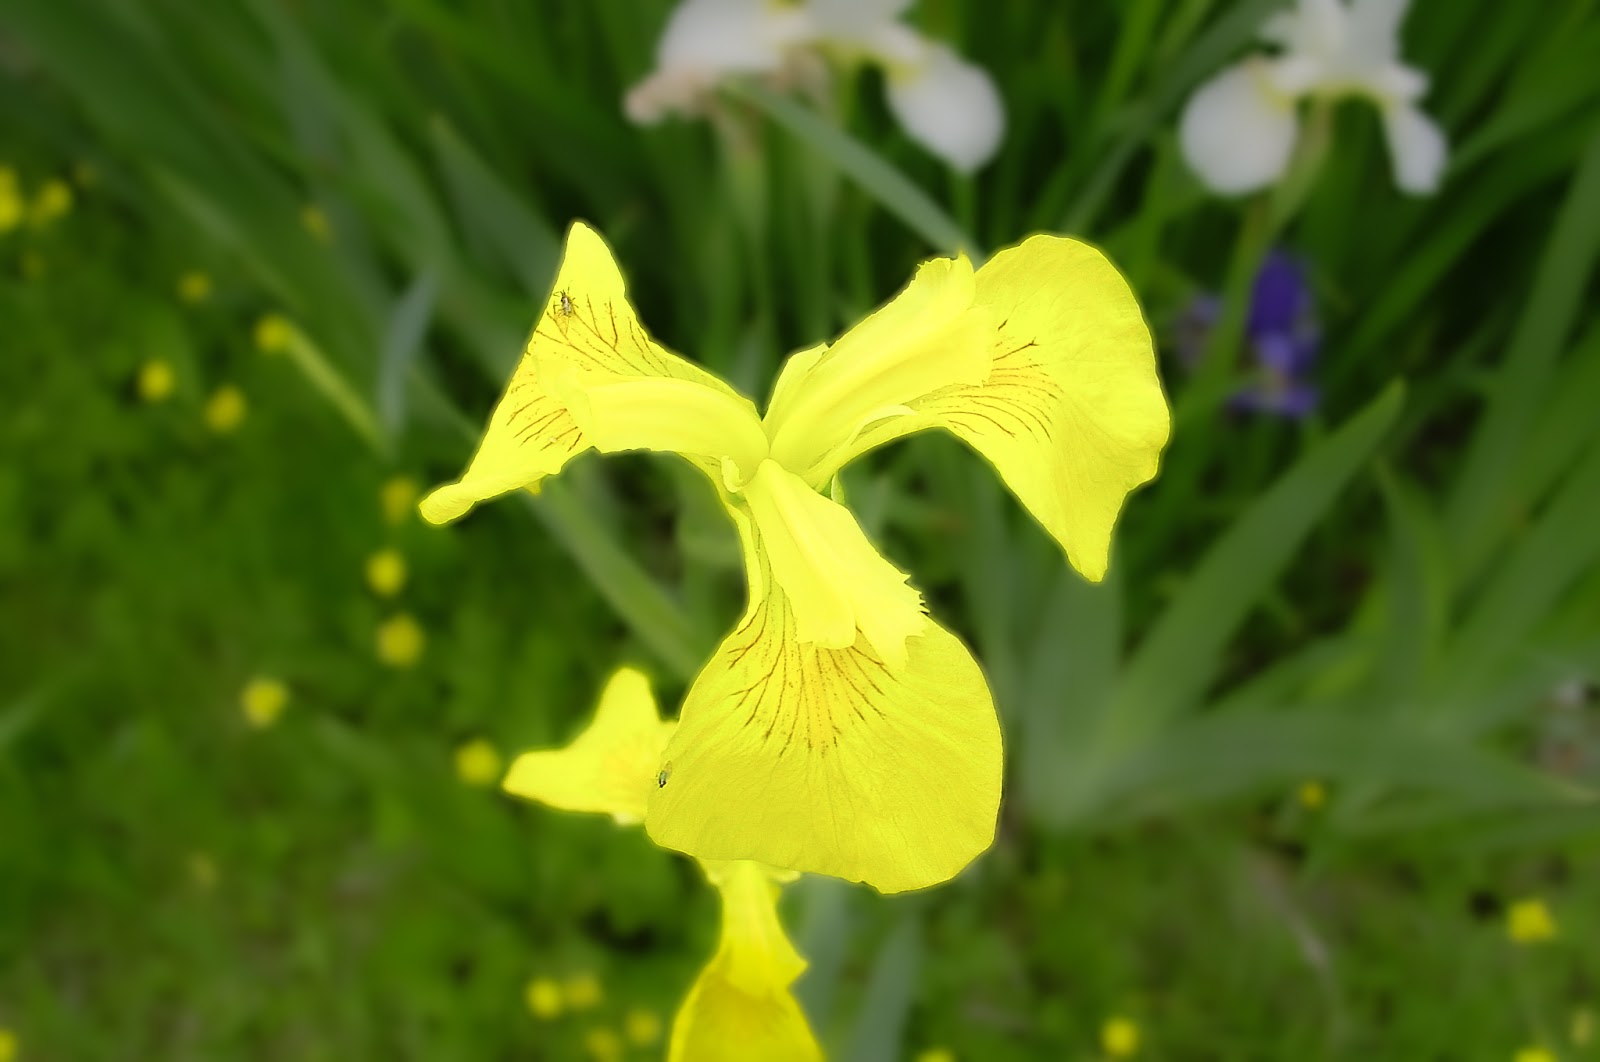 A yellow Iris with small brown veins